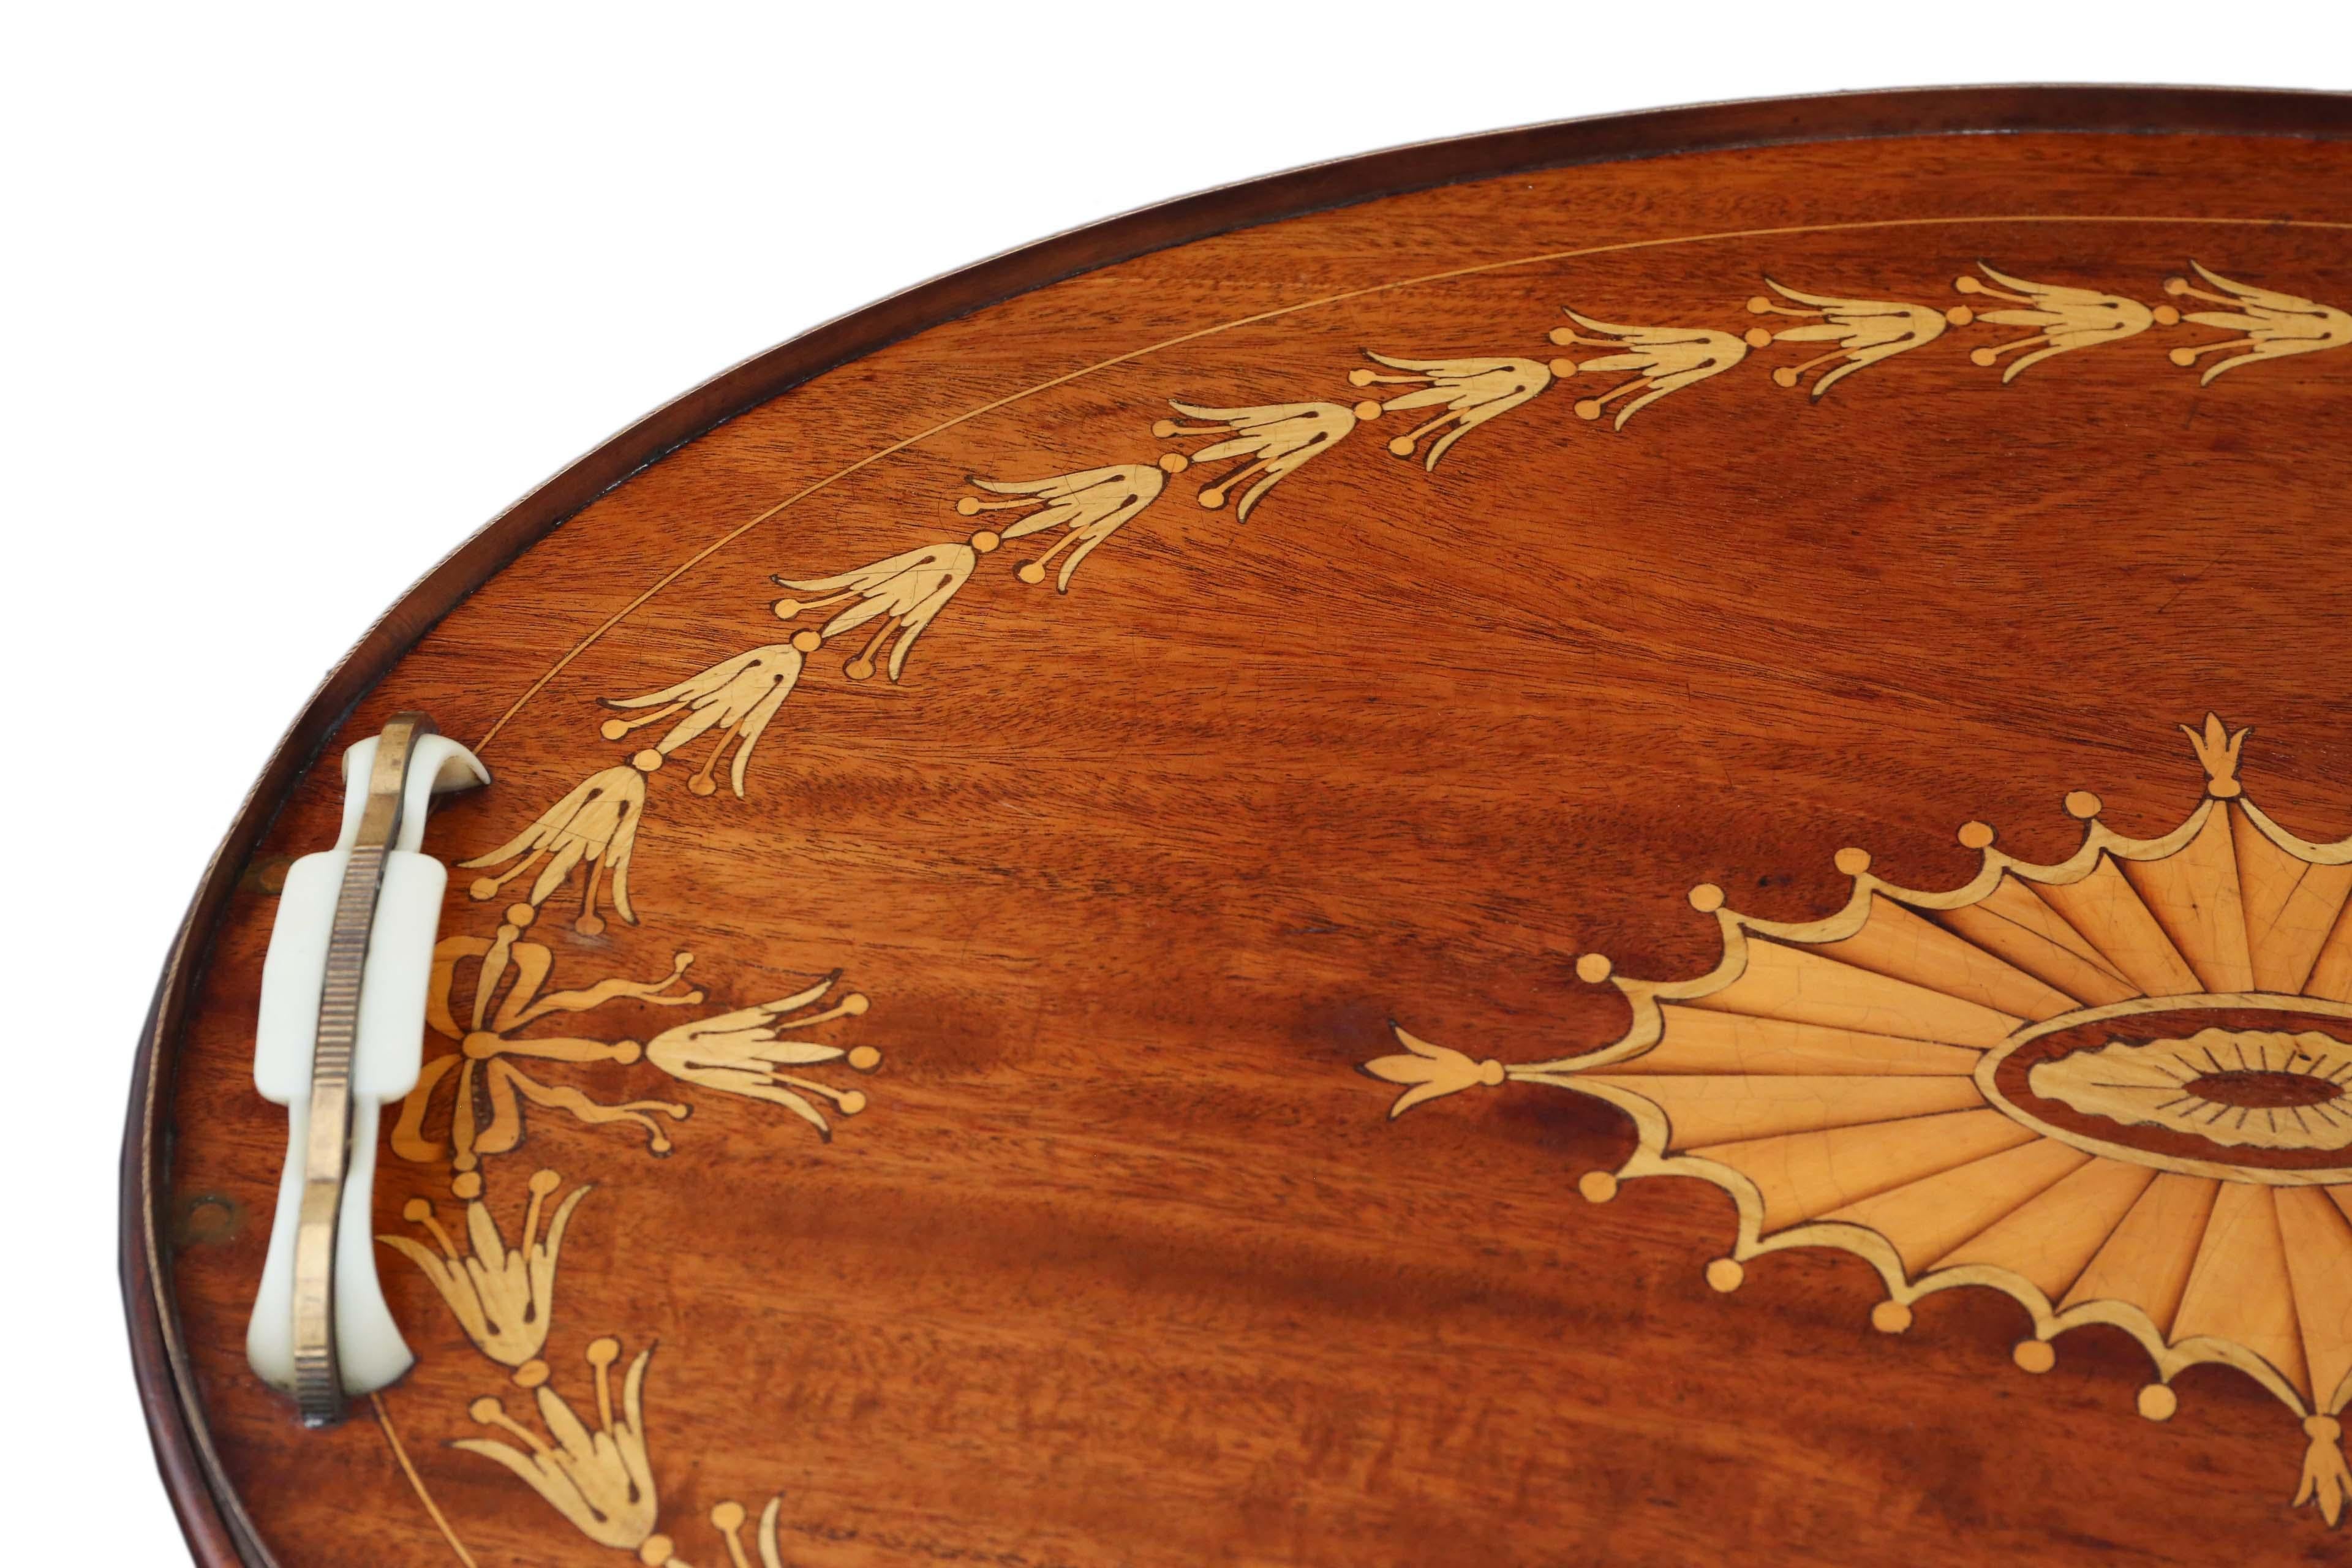 Antique quality inlaid mahogany oval serving tea tray, circa 1915.

A great quality tray.... one of the best examples that we have seen.

Very attractive, with lovely proportions and styling.

Desirable oval shape, with fantastic marquetry